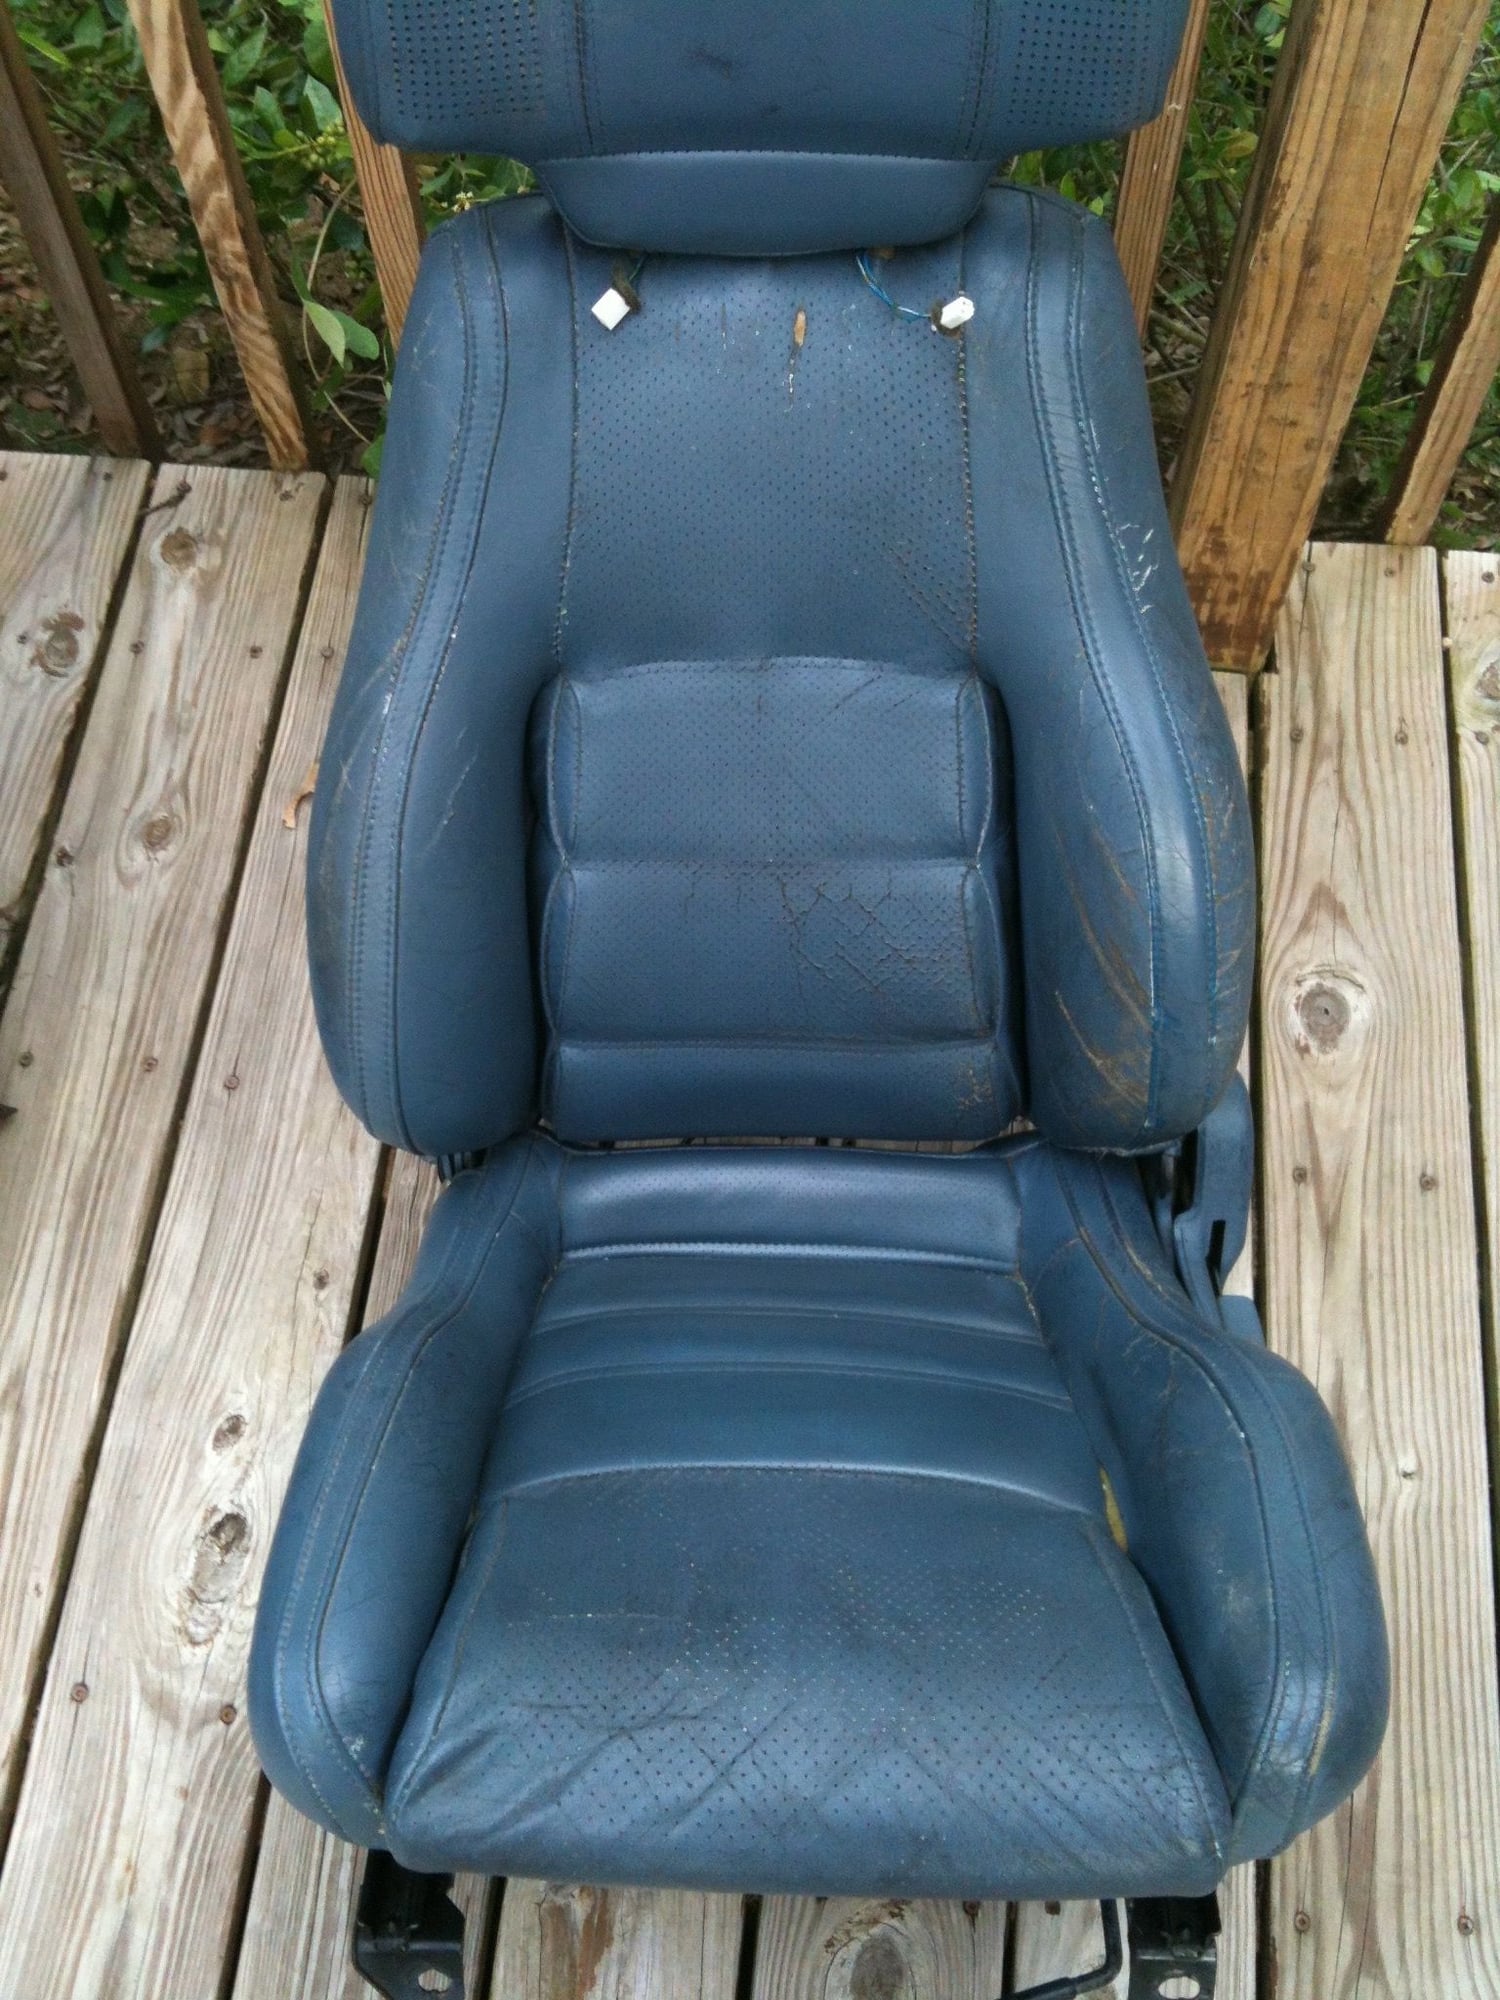 Interior/Upholstery - Pair of Blue leather convertible seats (with headsets) and rails - Used - 1988 to 1991 Mazda RX-7 - Nashville, TN 37212, United States